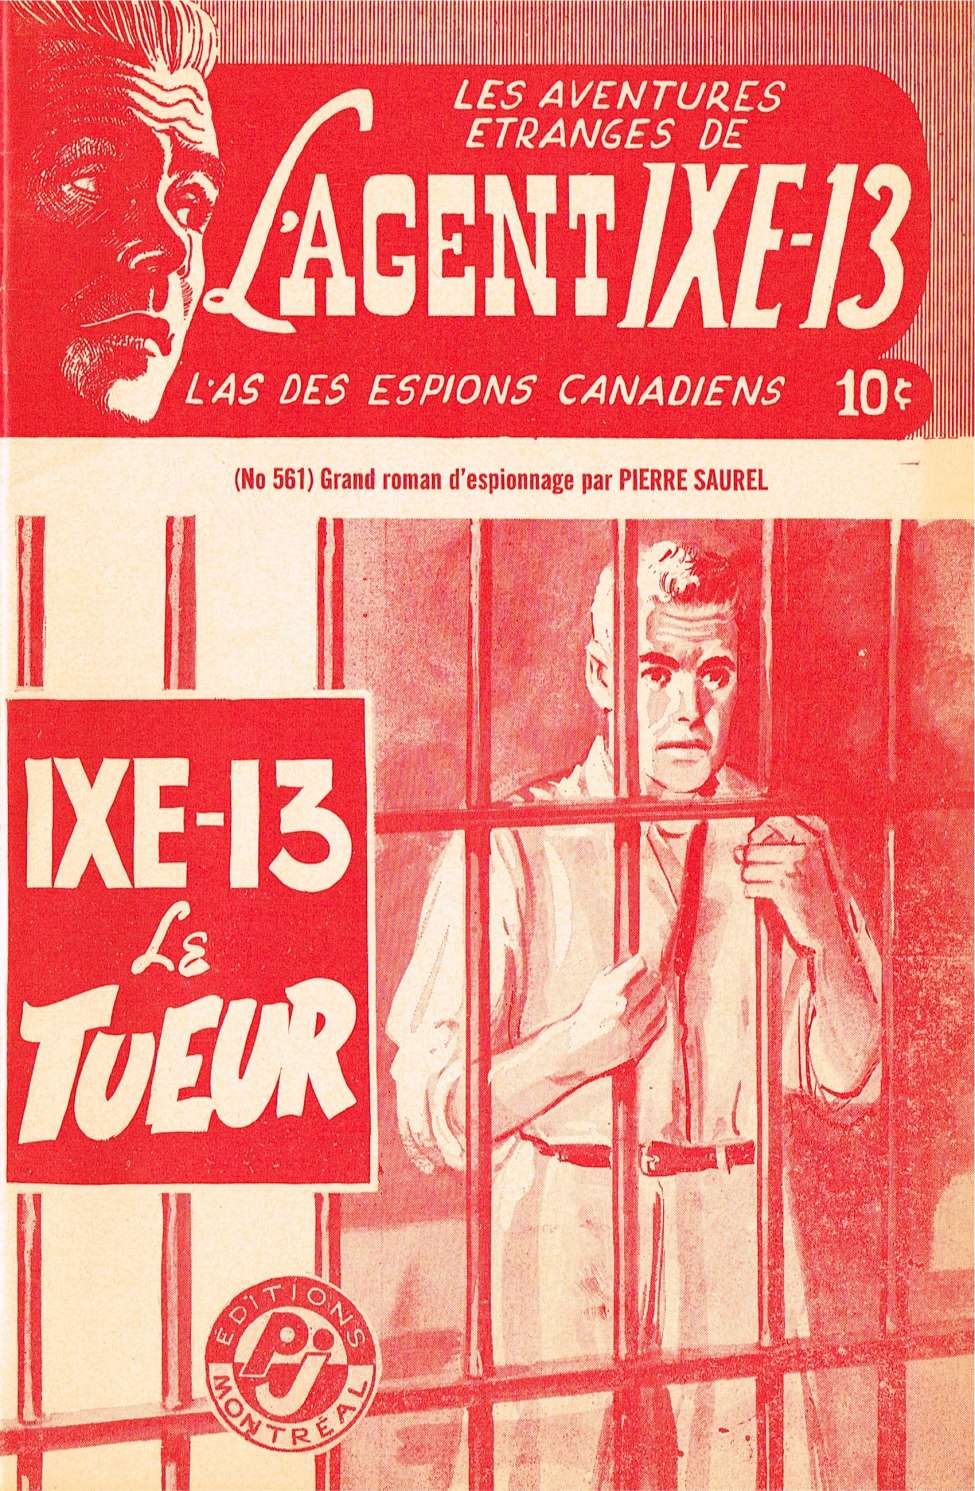 Book Cover For L'Agent IXE-13 v2 561 - IXE-13 le tueur